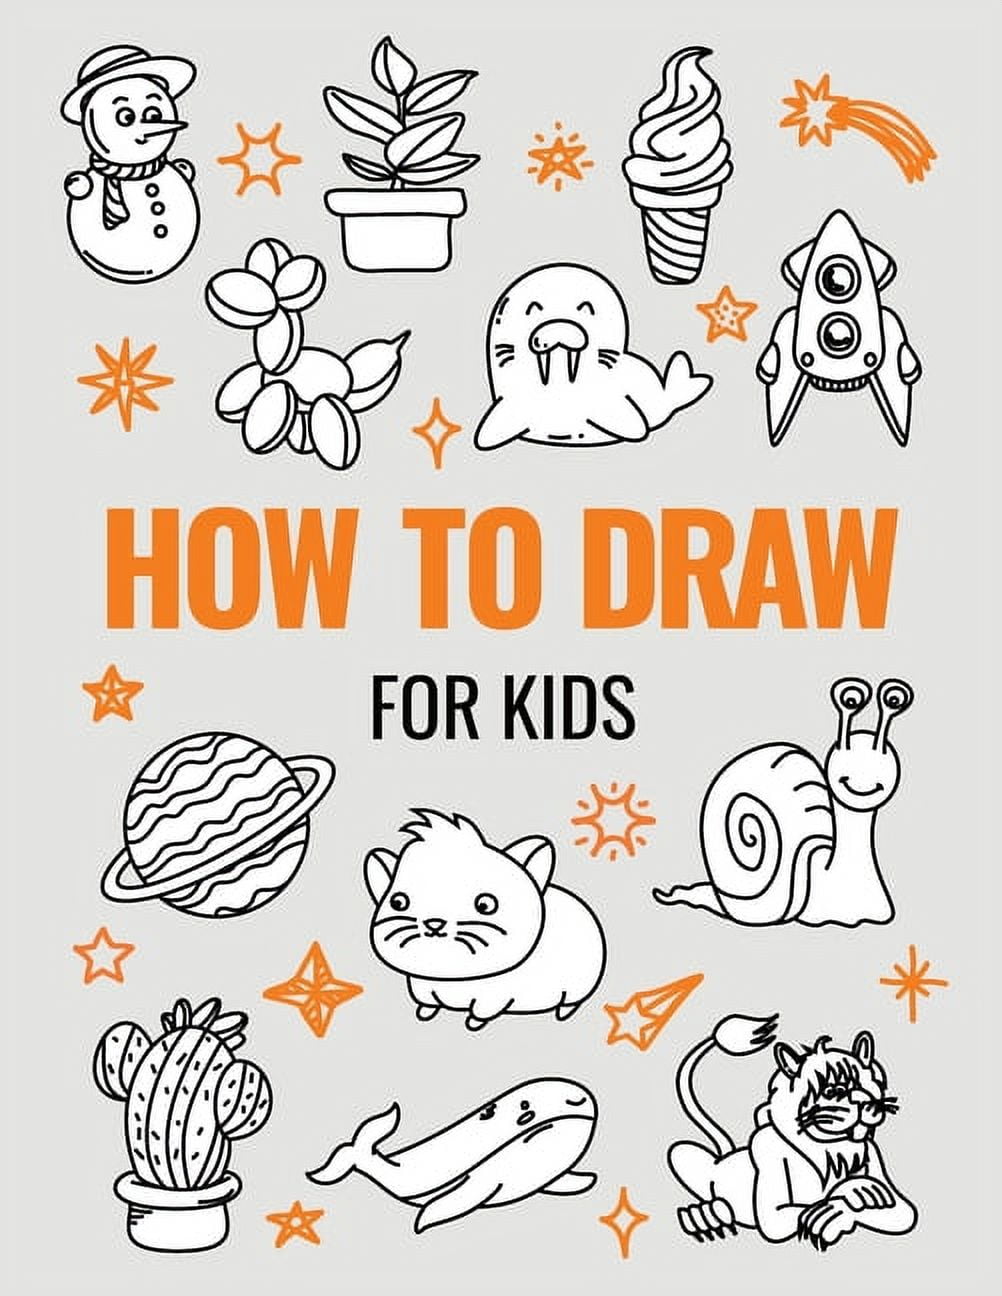 How To Draw 101 Cute Stuff For Kids: Simple and Easy Step-by-Step Guide Book to Draw Everything like Animals, Gift, Avocado and more with Cute Style [Book]